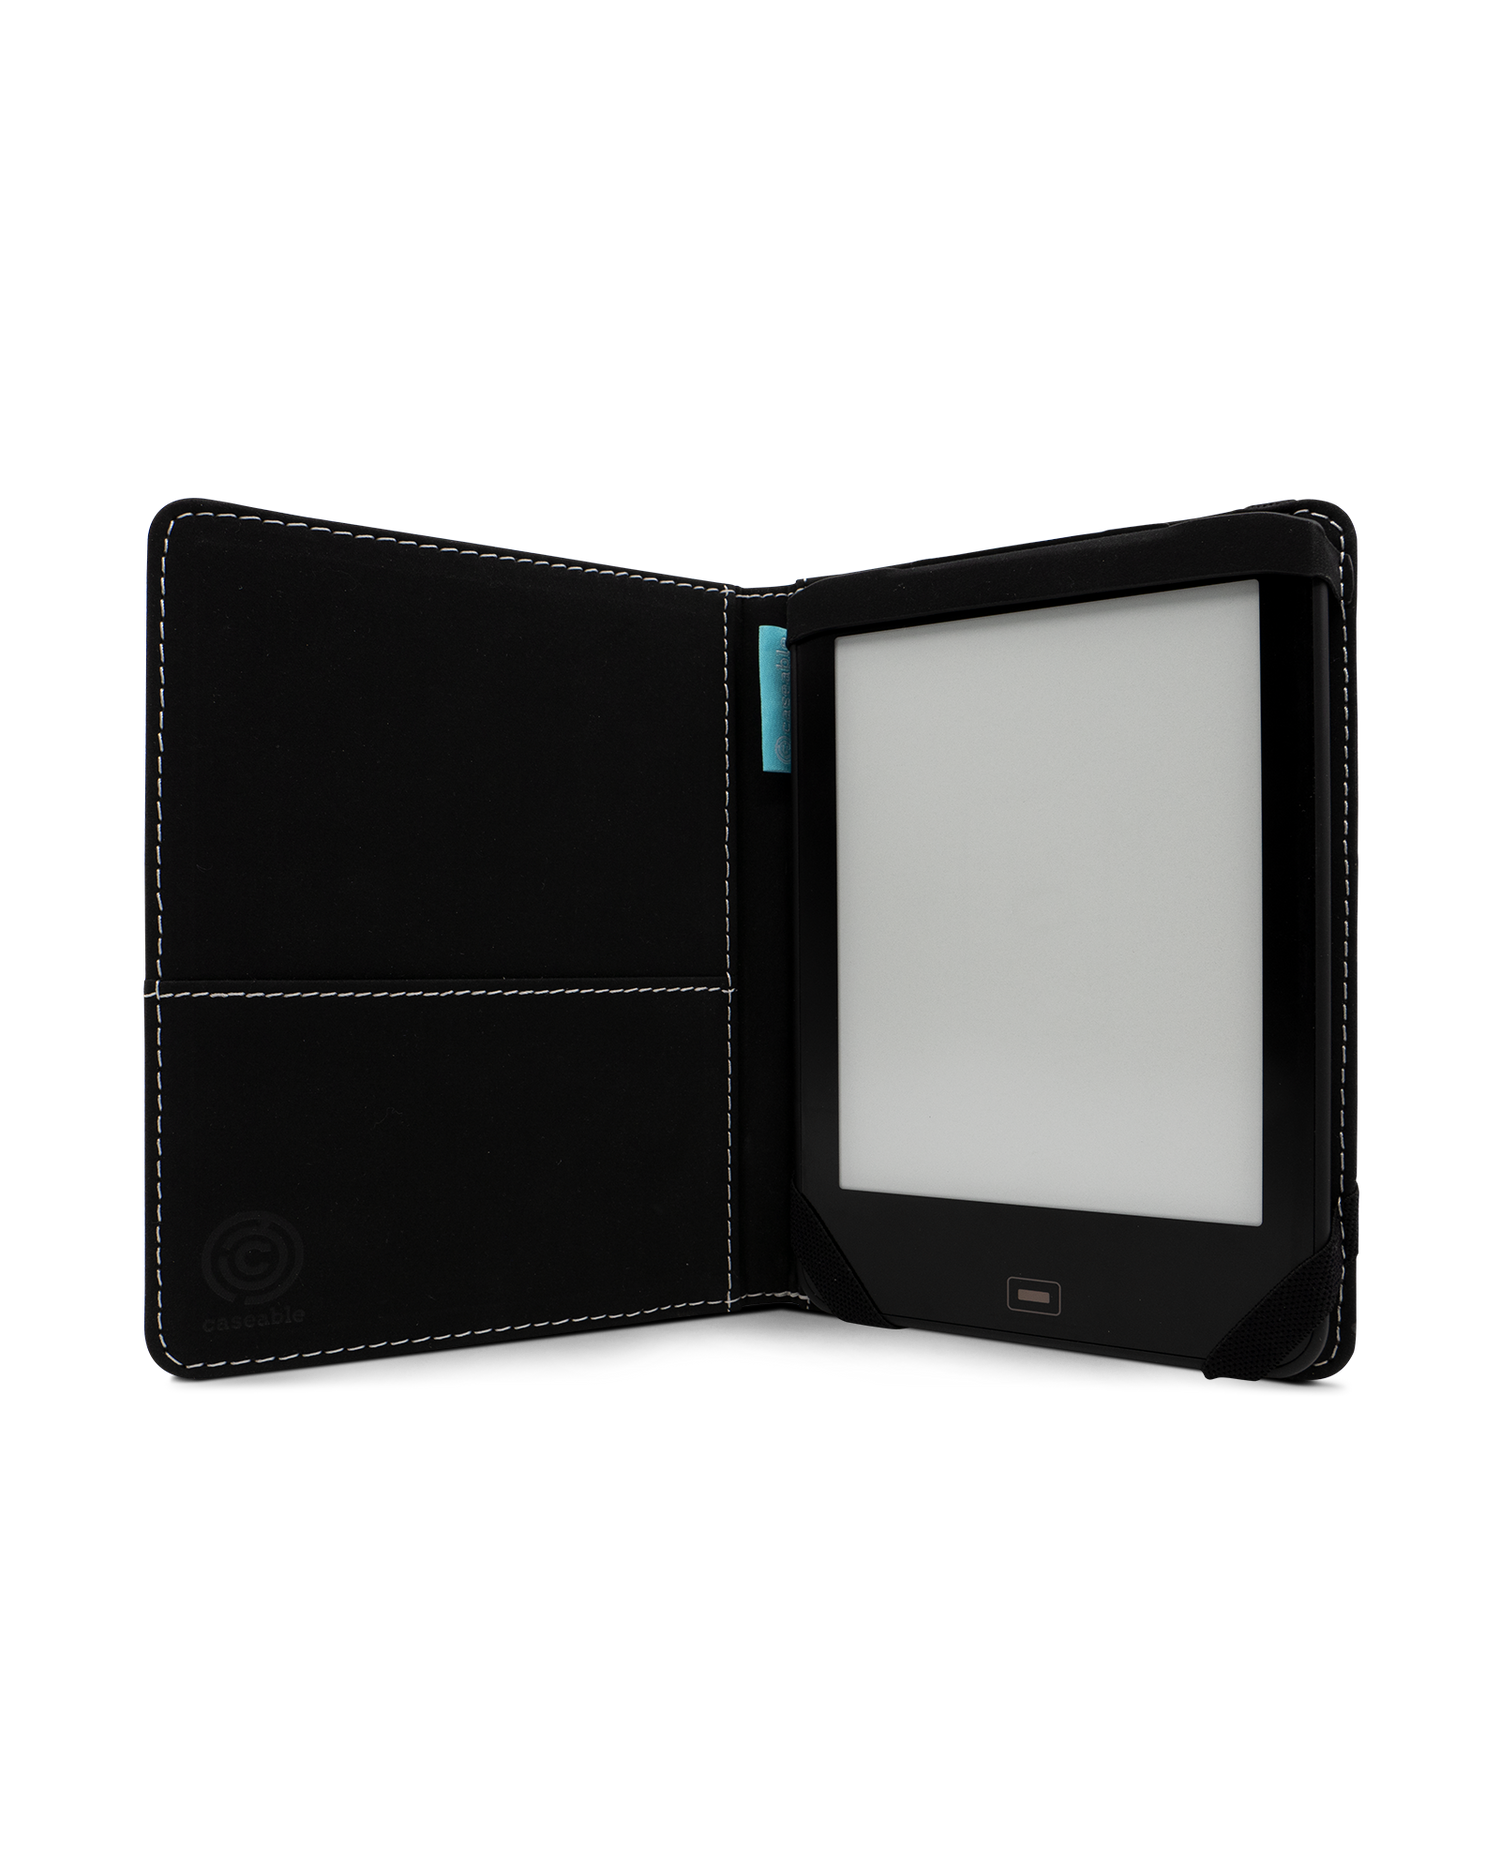 Lake eReader Case for tolino vision 1 to 4 HD: Opened interior view